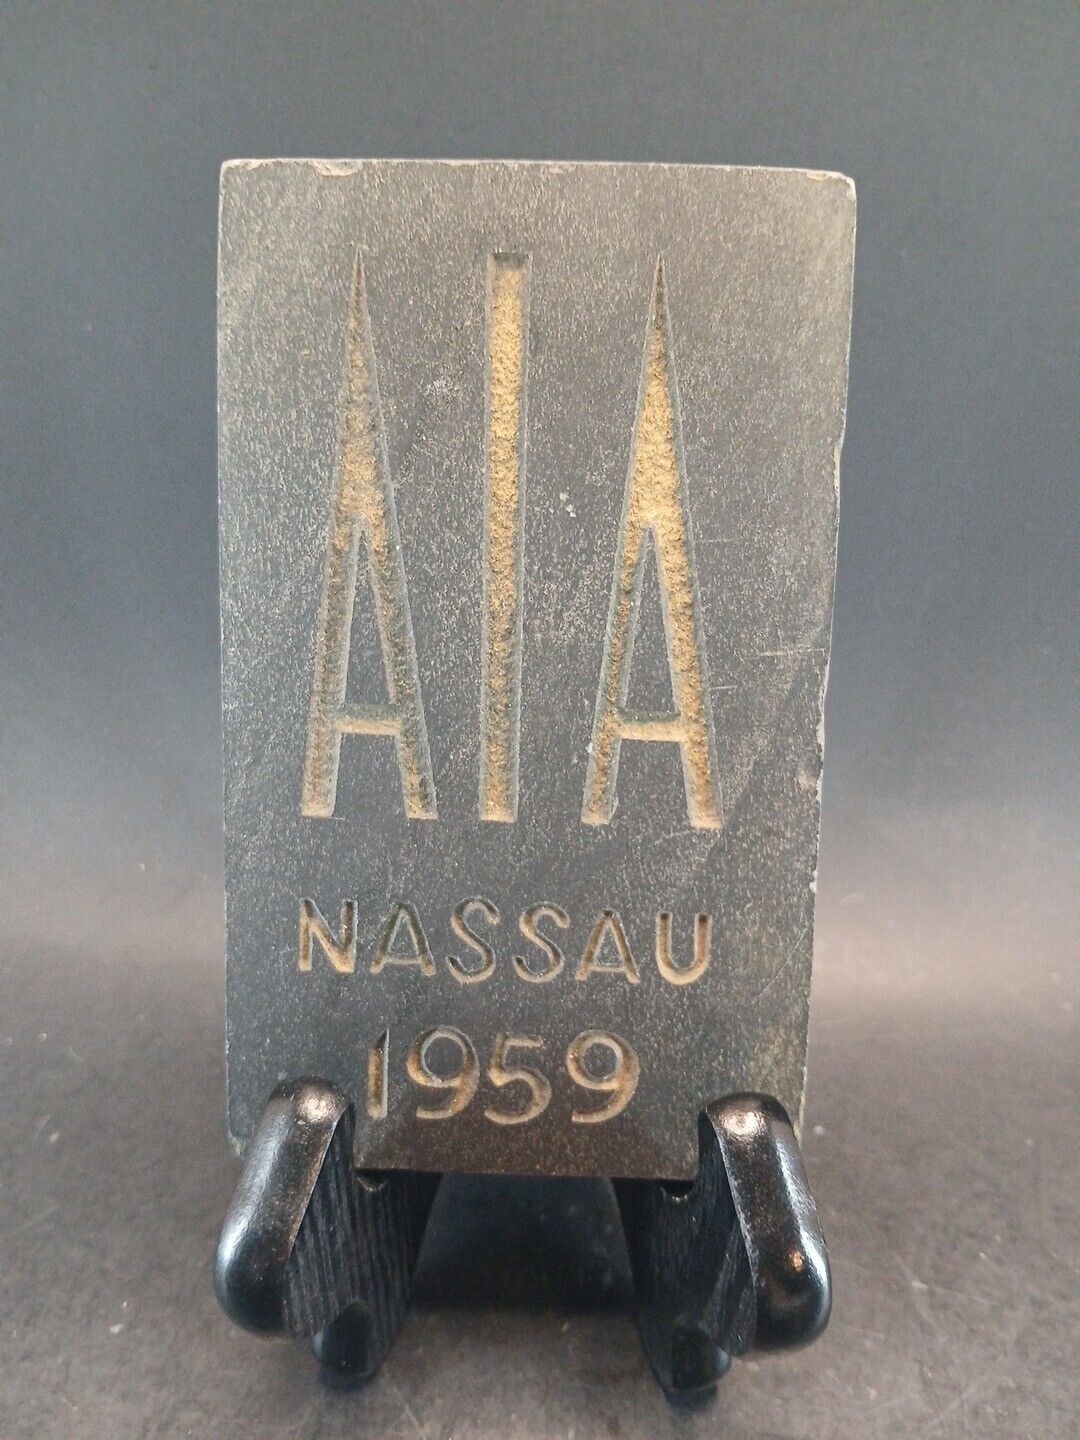 american institute of architects Nassau 1959 Carved Stone Award